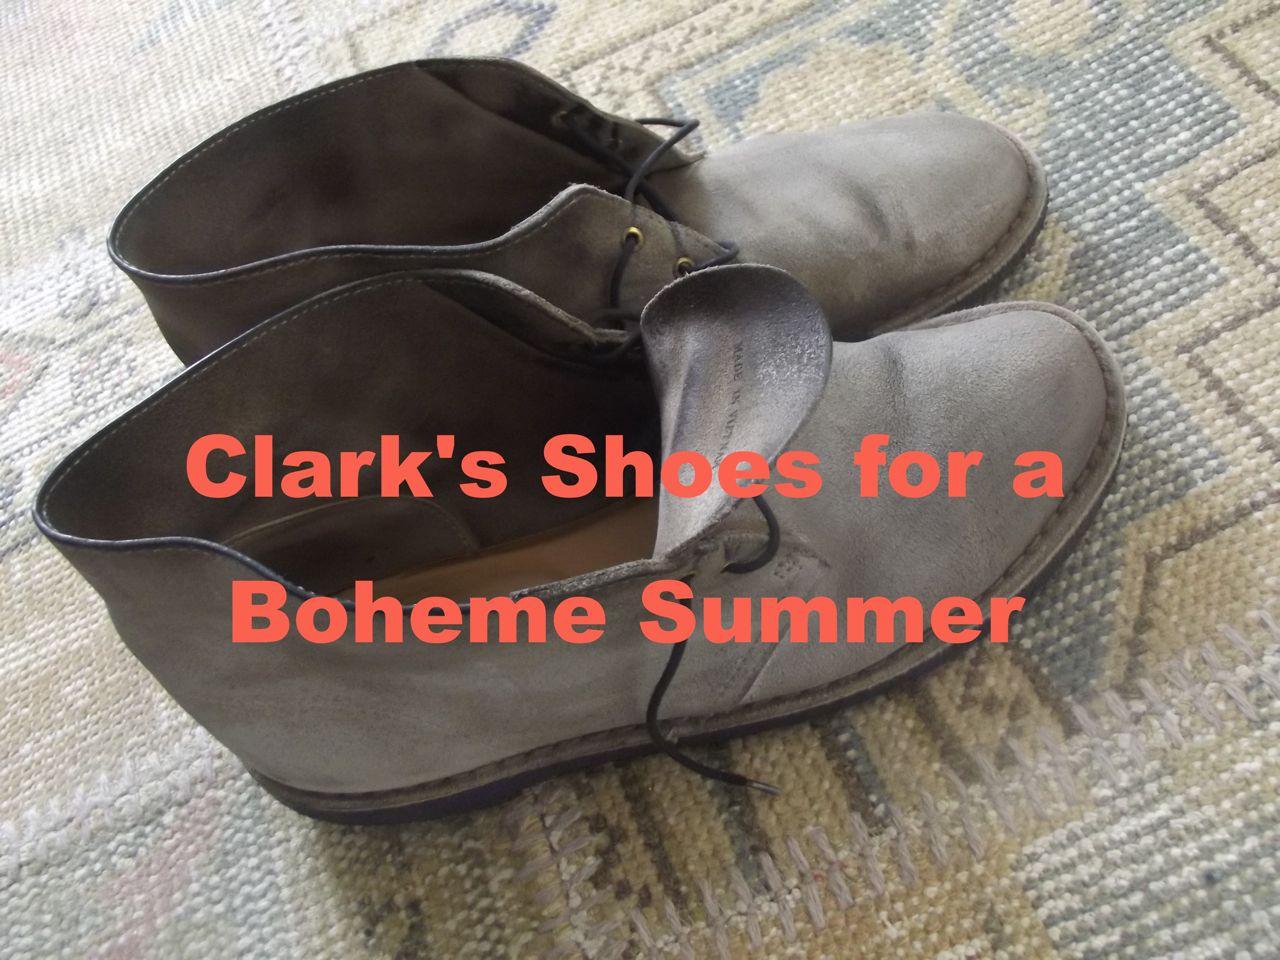 <!--:en-->Clark’s Shoes great for a cool summer optic!!!!!<!--:-->